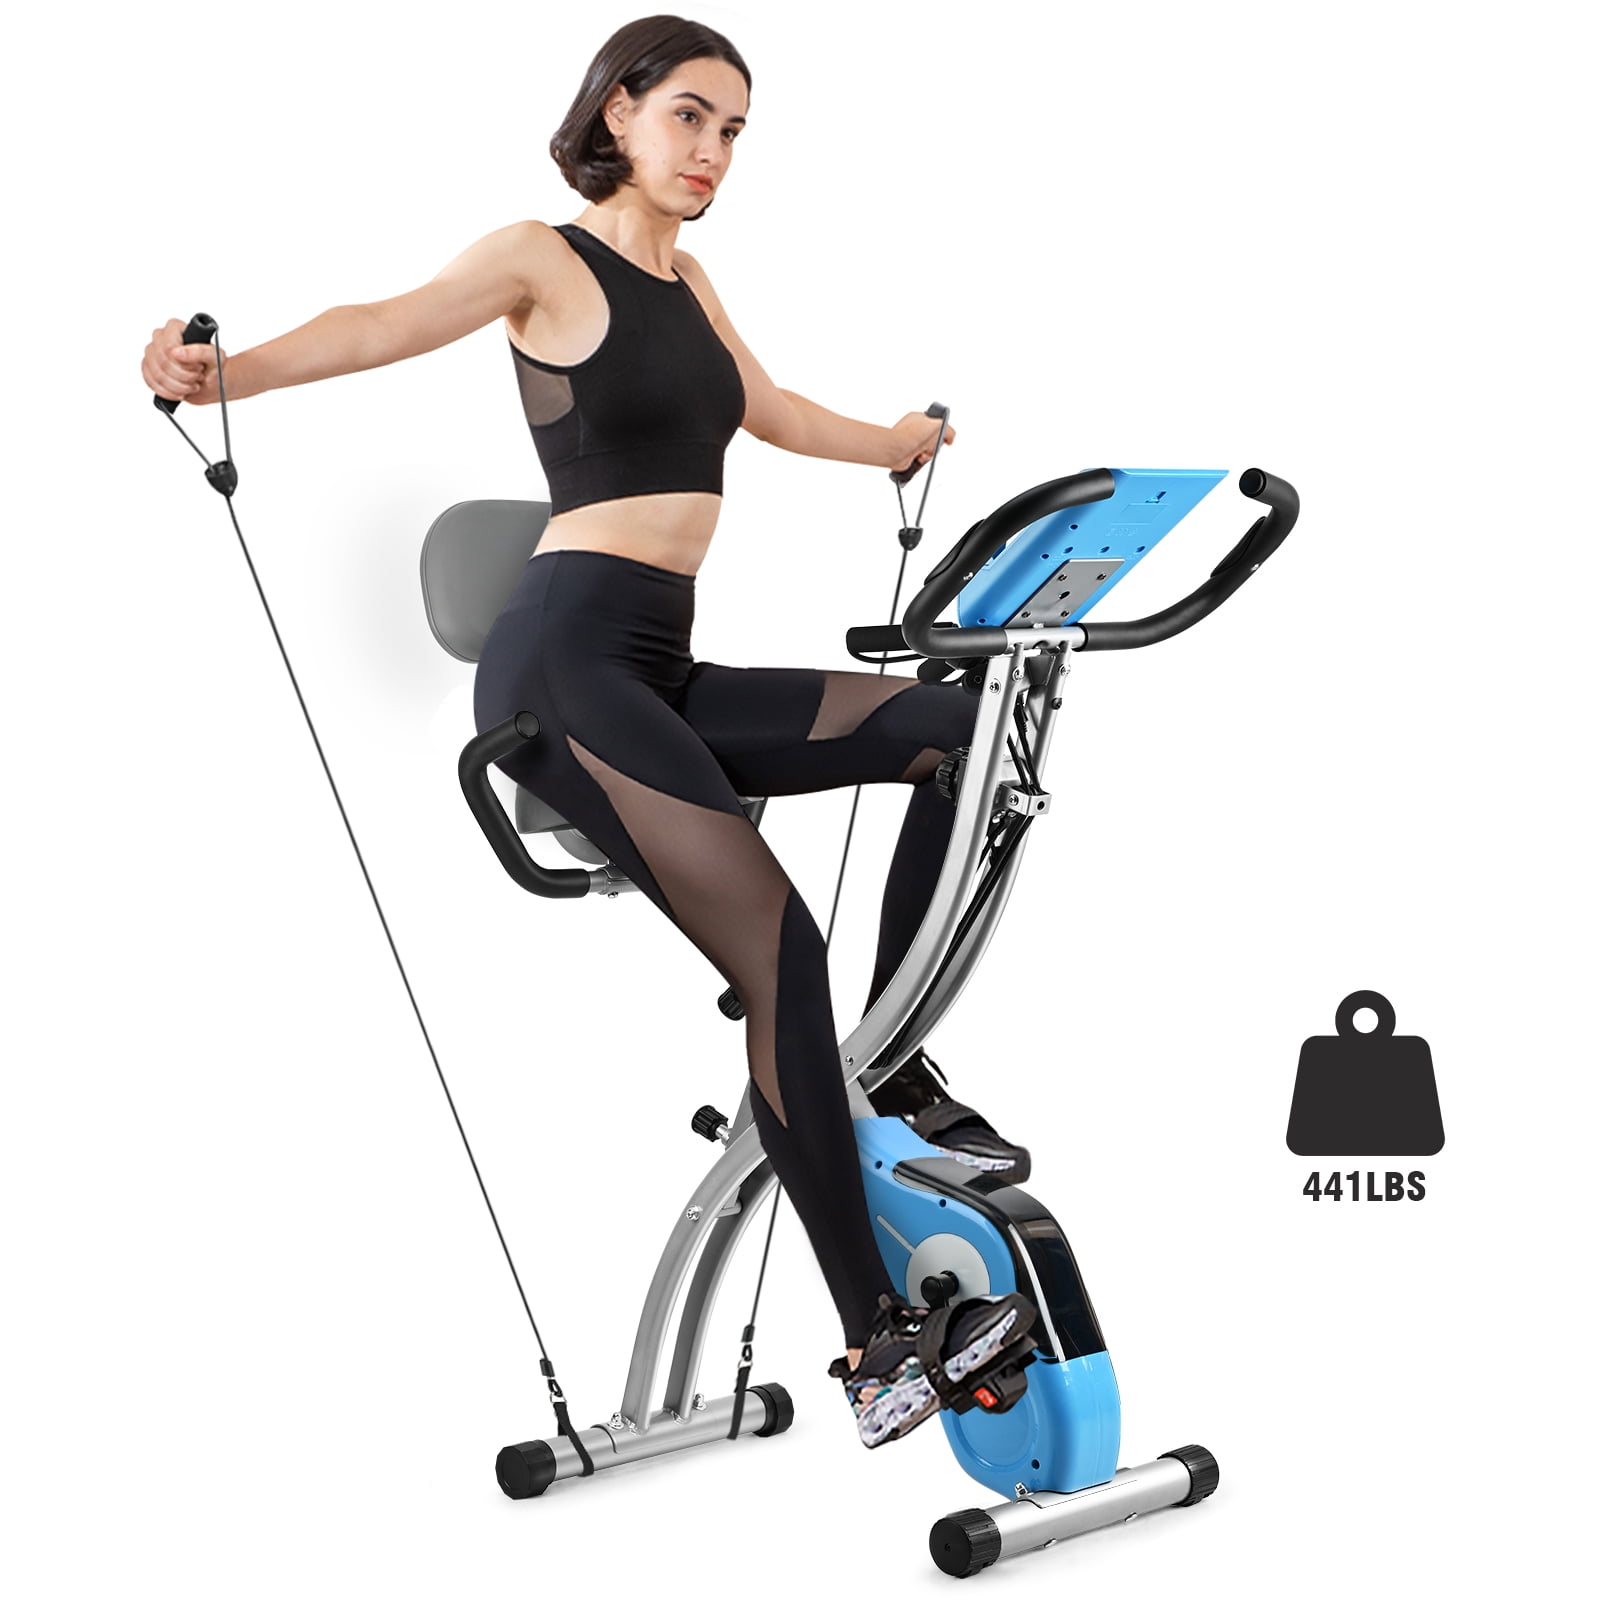 Wonder Maxi Exercise Bike Magnetic Fitness Cycle Folding Stationary Bike 440 LBS Indoor Home Use(Blue)